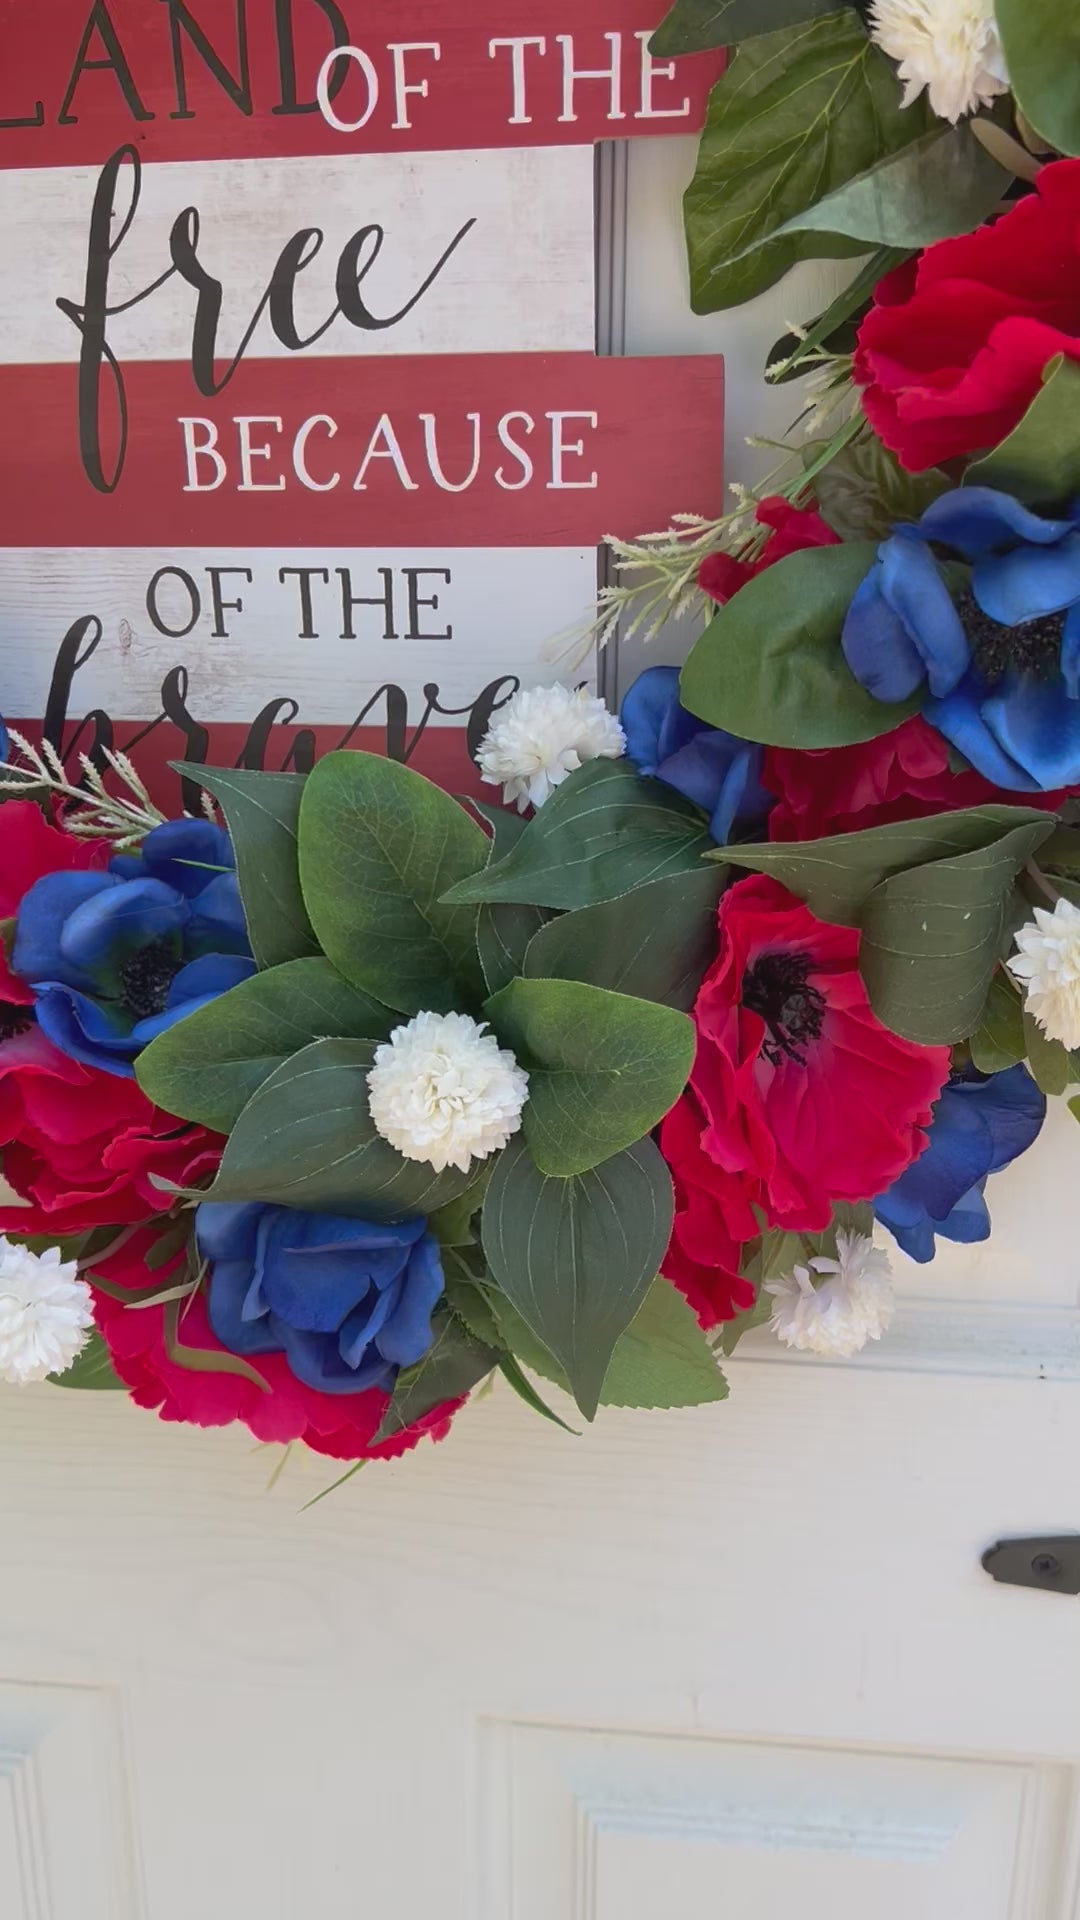 Red Poppy Anemone Wreath 28" Patriotic Wreath, "Land of the Free Because of the Brave"